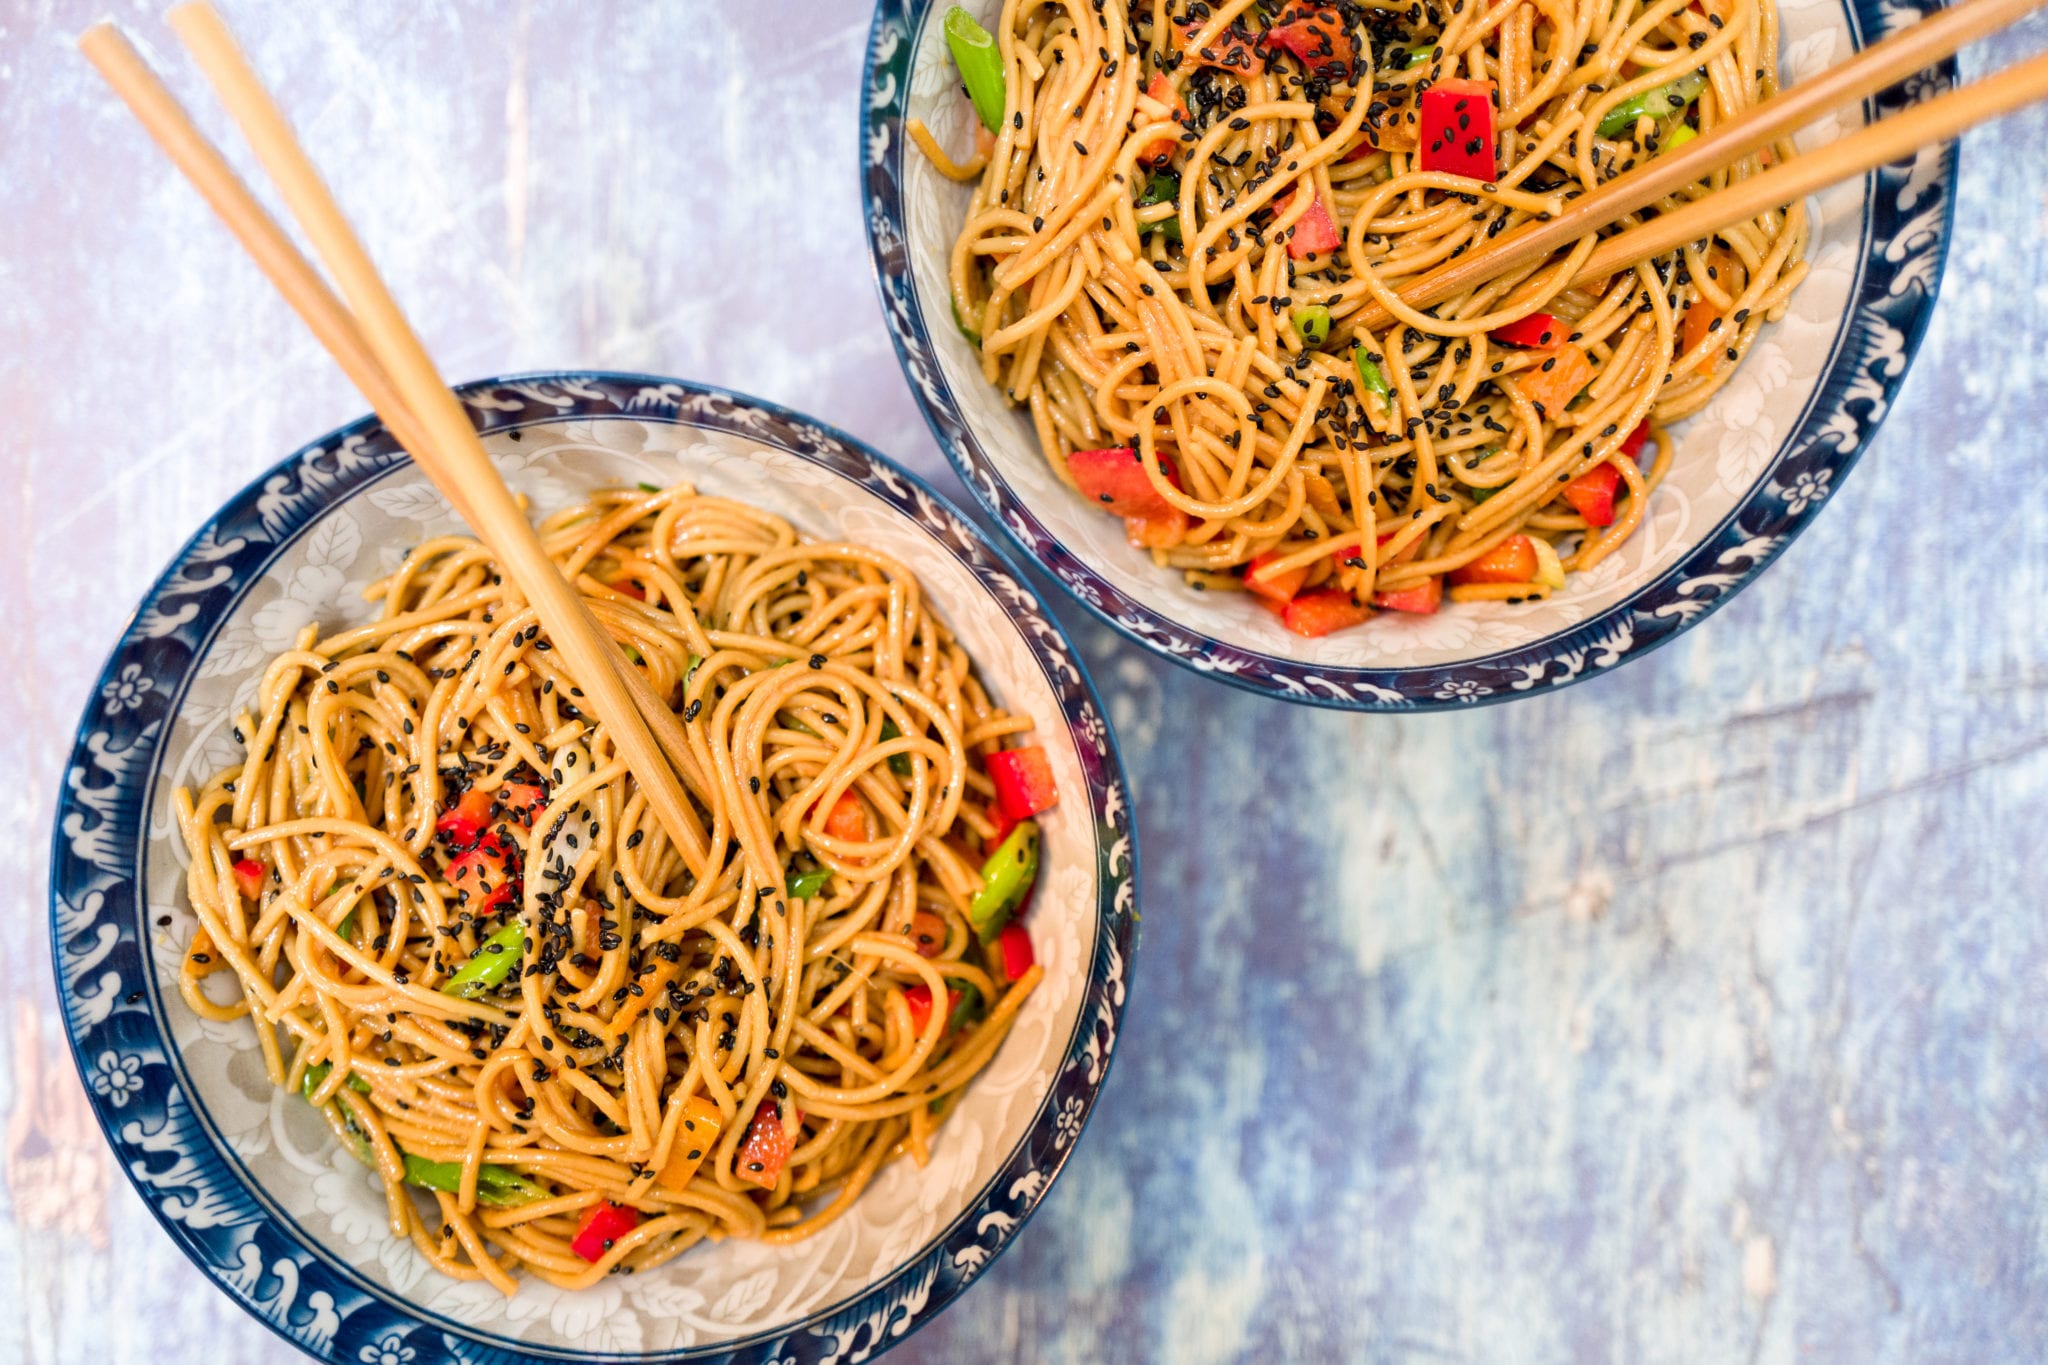 Celebrate the Lunar New Year with Longevity Noodles